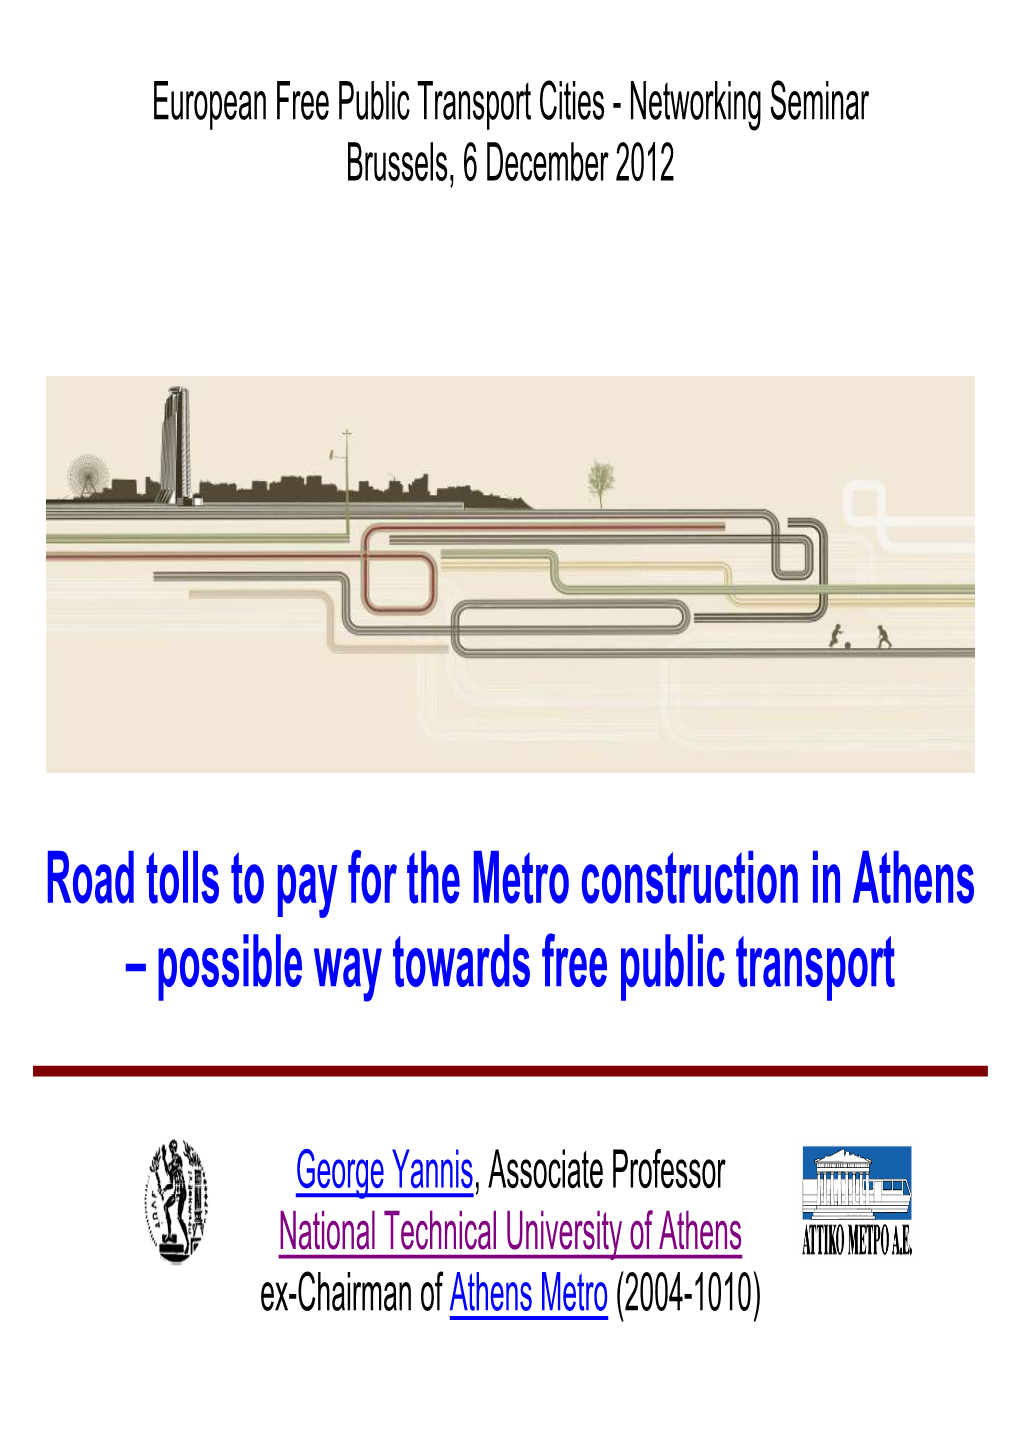 Road Tolls to Pay for the Metro Construction in Athens – Possible Way Towards Free Public Transport